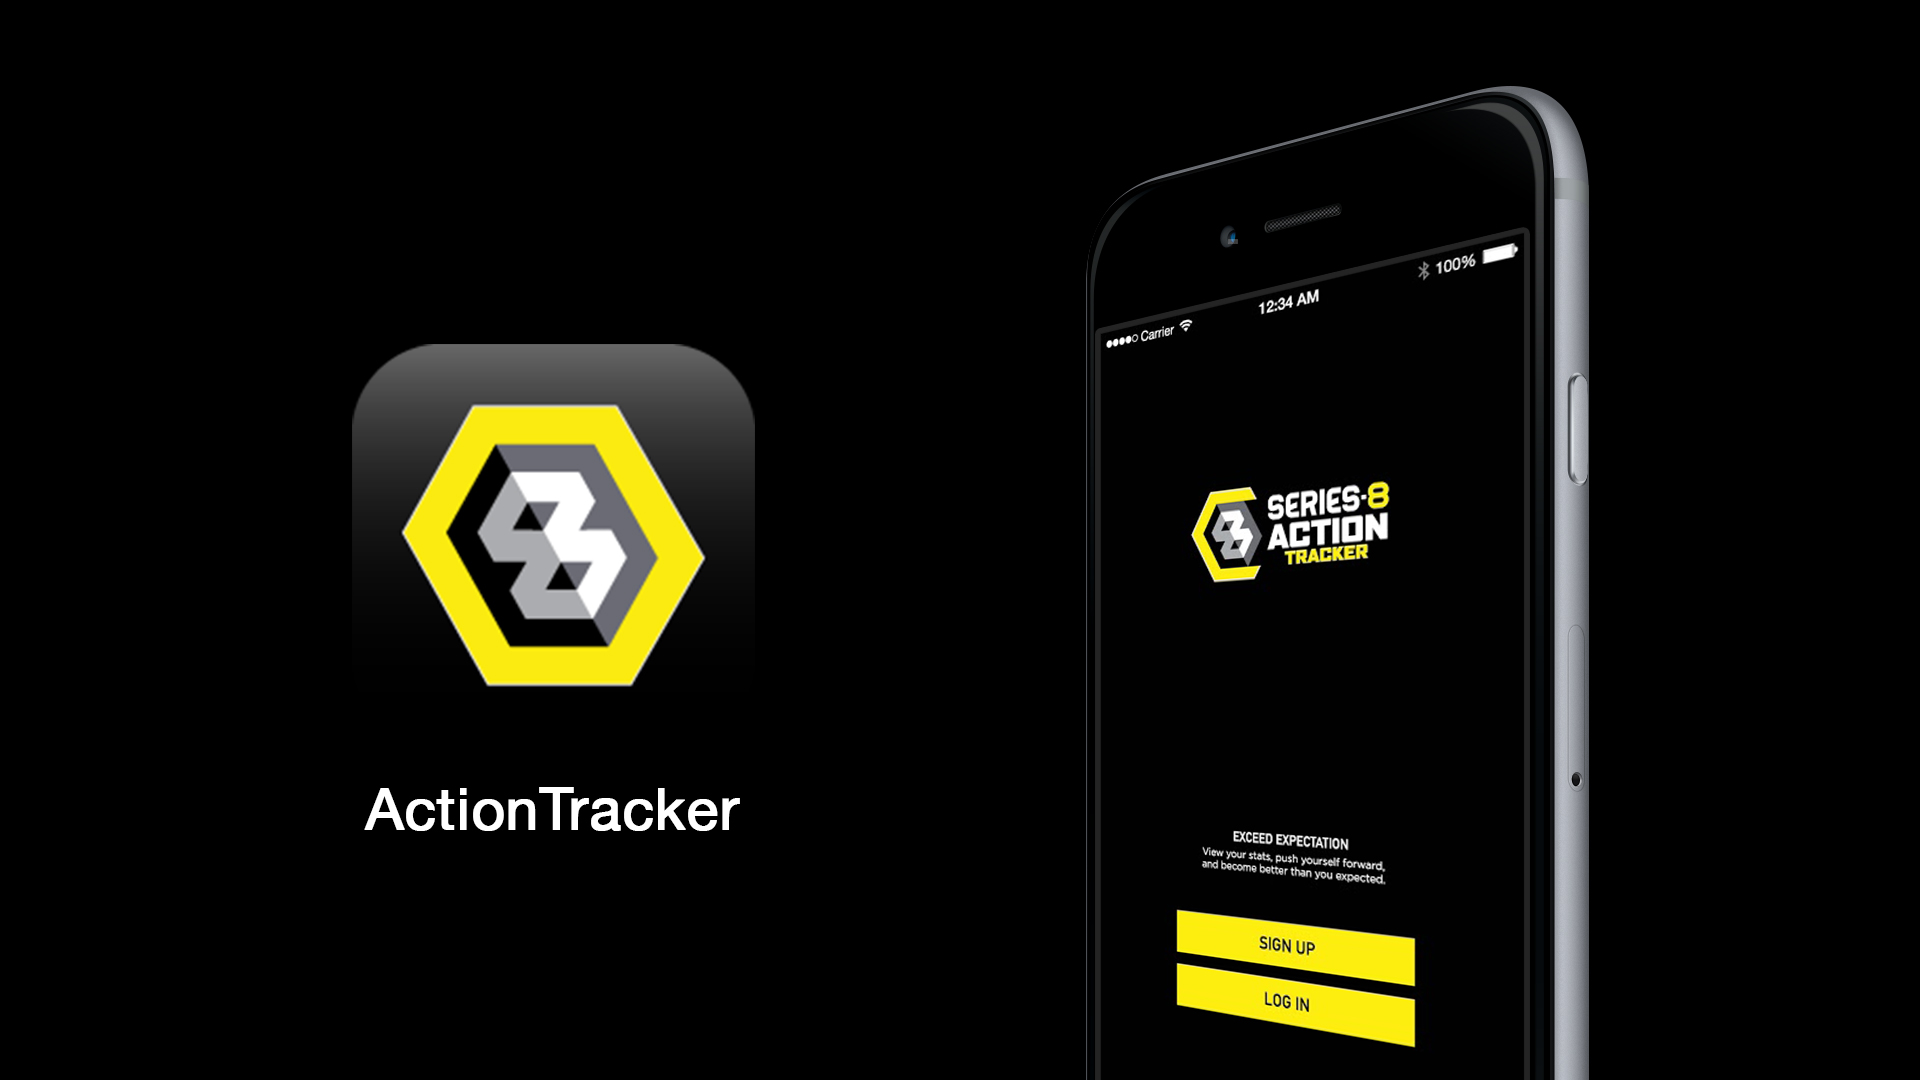 Series 8 Action Tracker